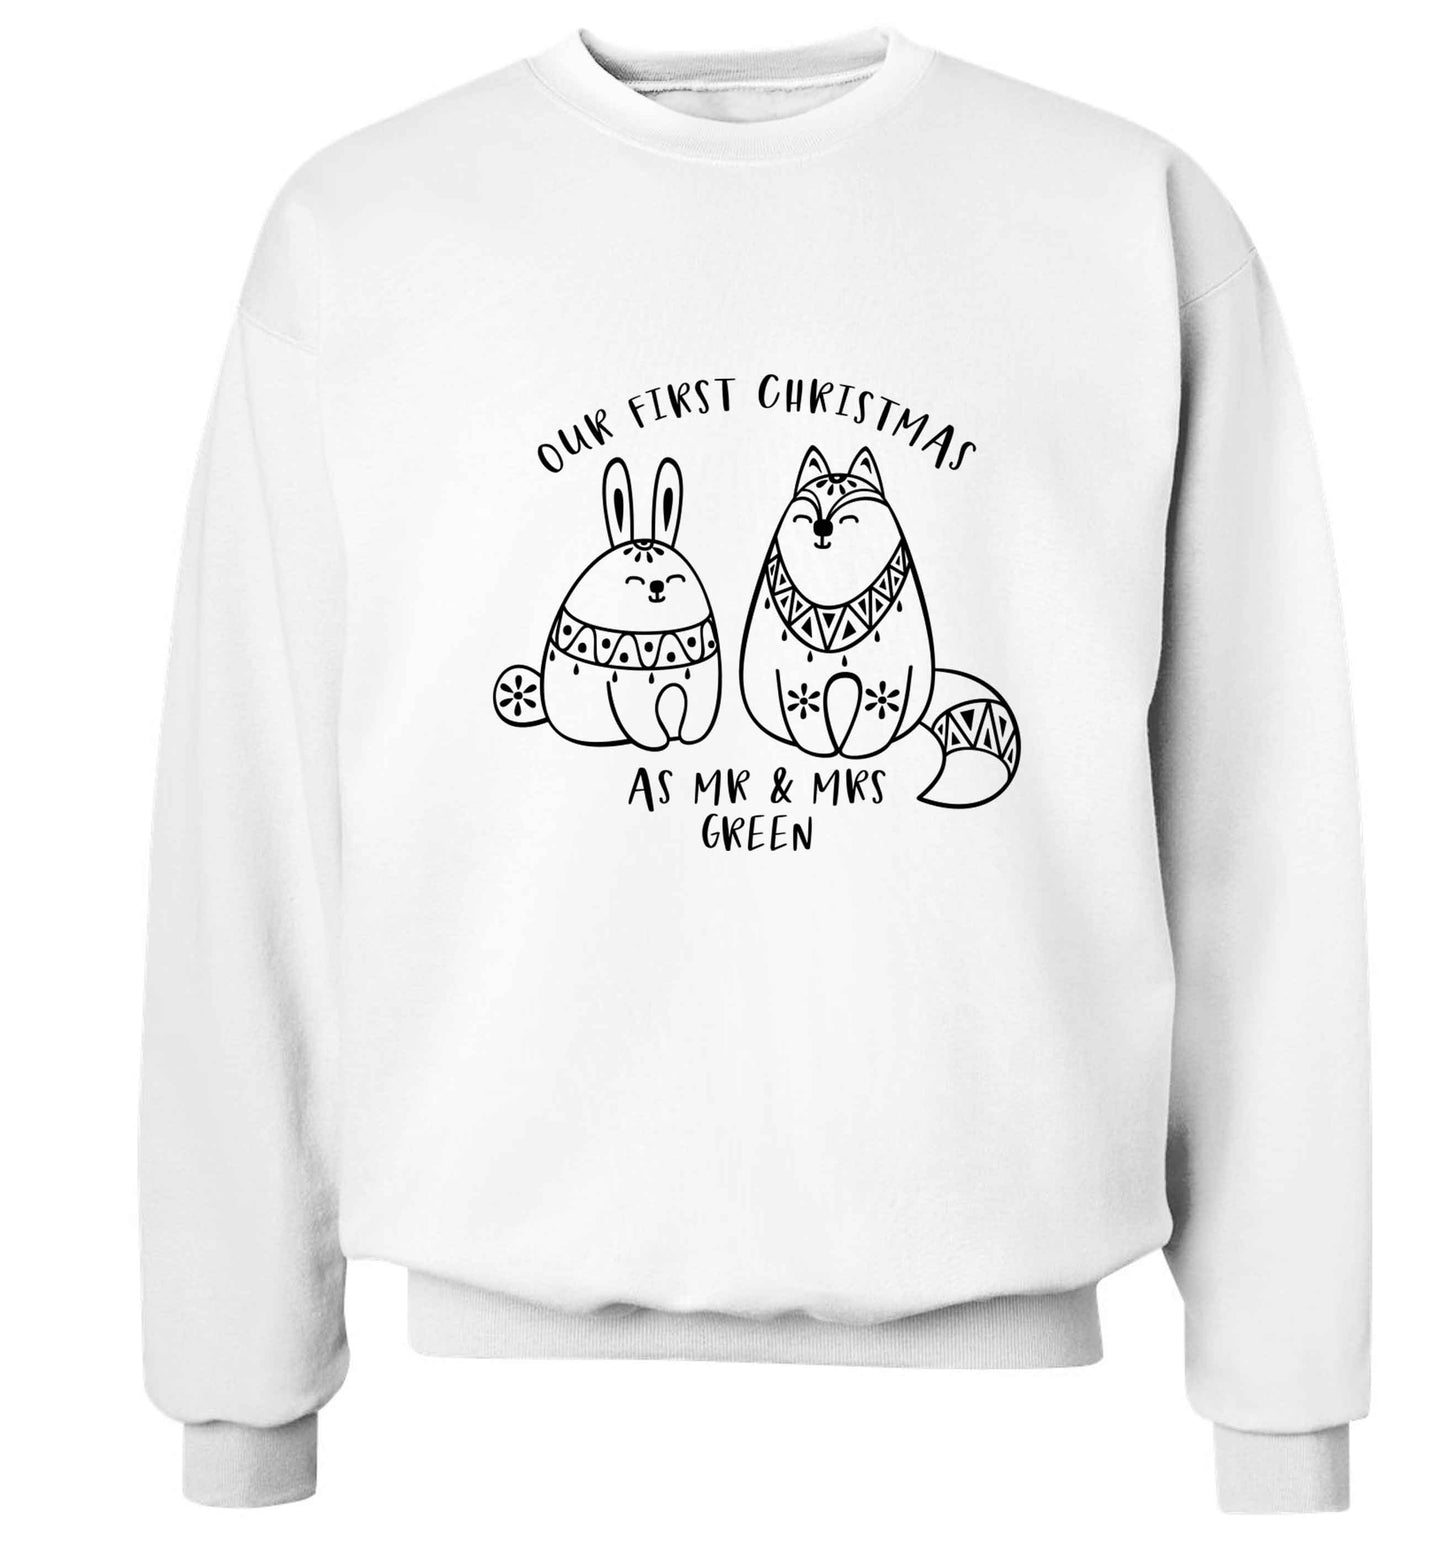 Our first Christmas as Mr & Mrs personalised Adult's unisex white Sweater 2XL